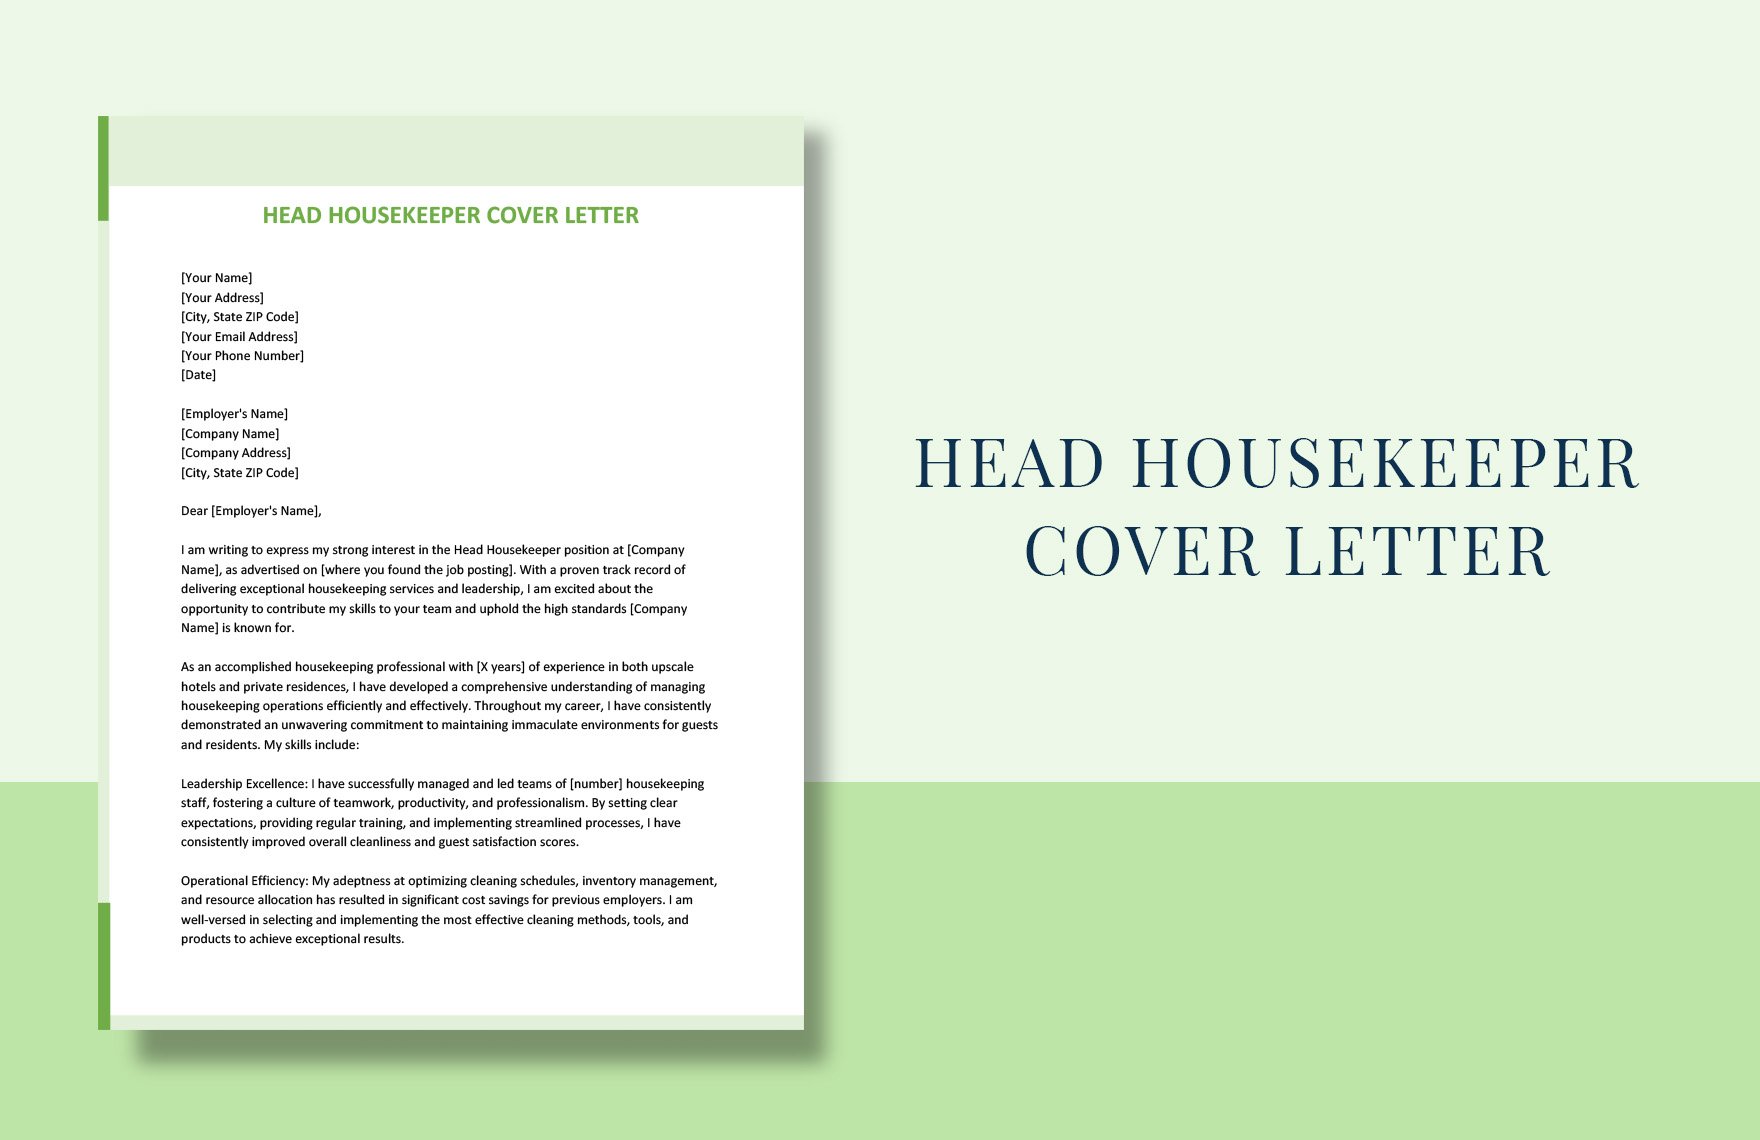 Head Housekeeper Cover Letter